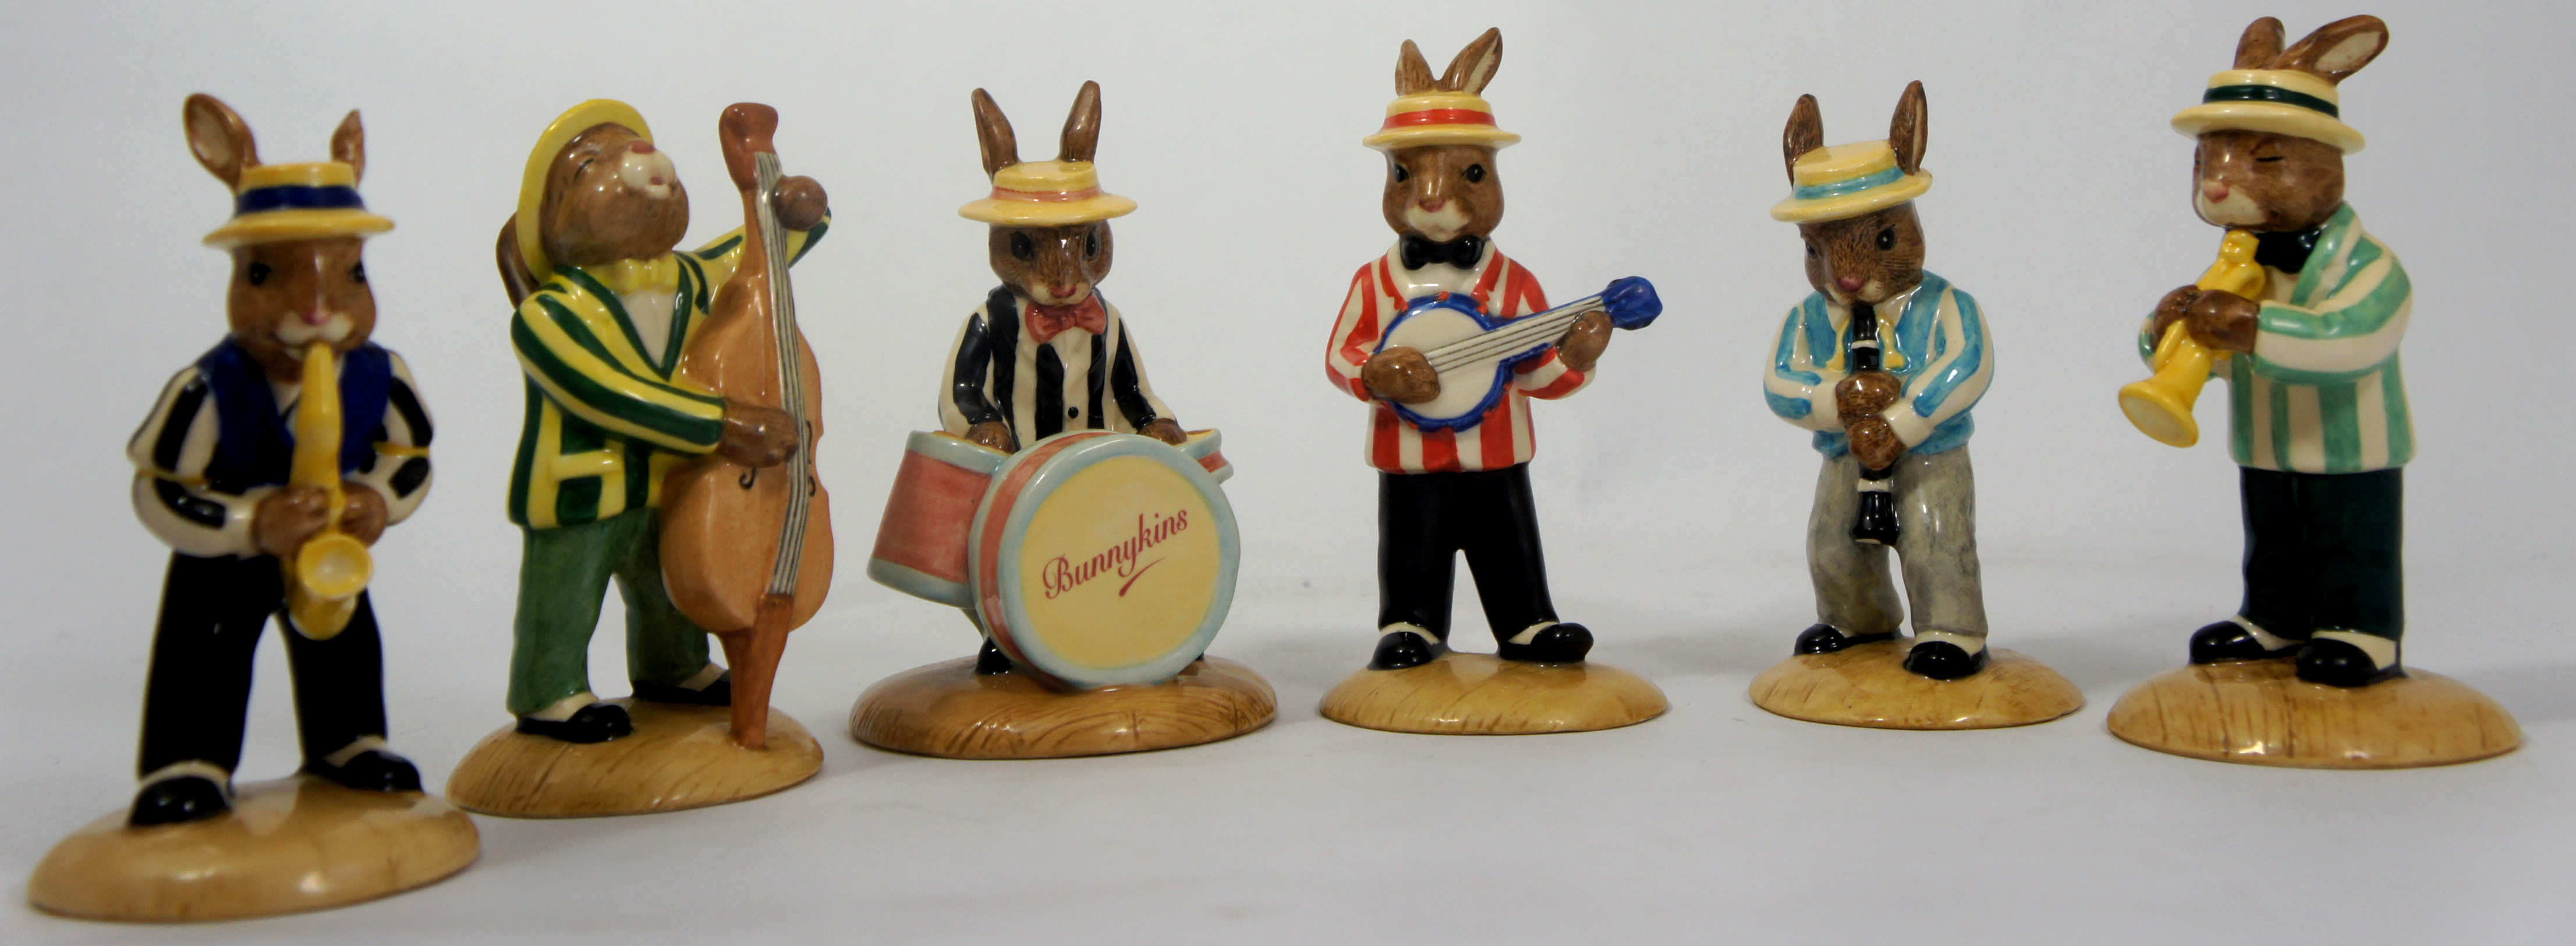 Royal Doulton Bunnykins Figures from the Jazz Band Collection comprising Trumpeter DB210, Clarinet